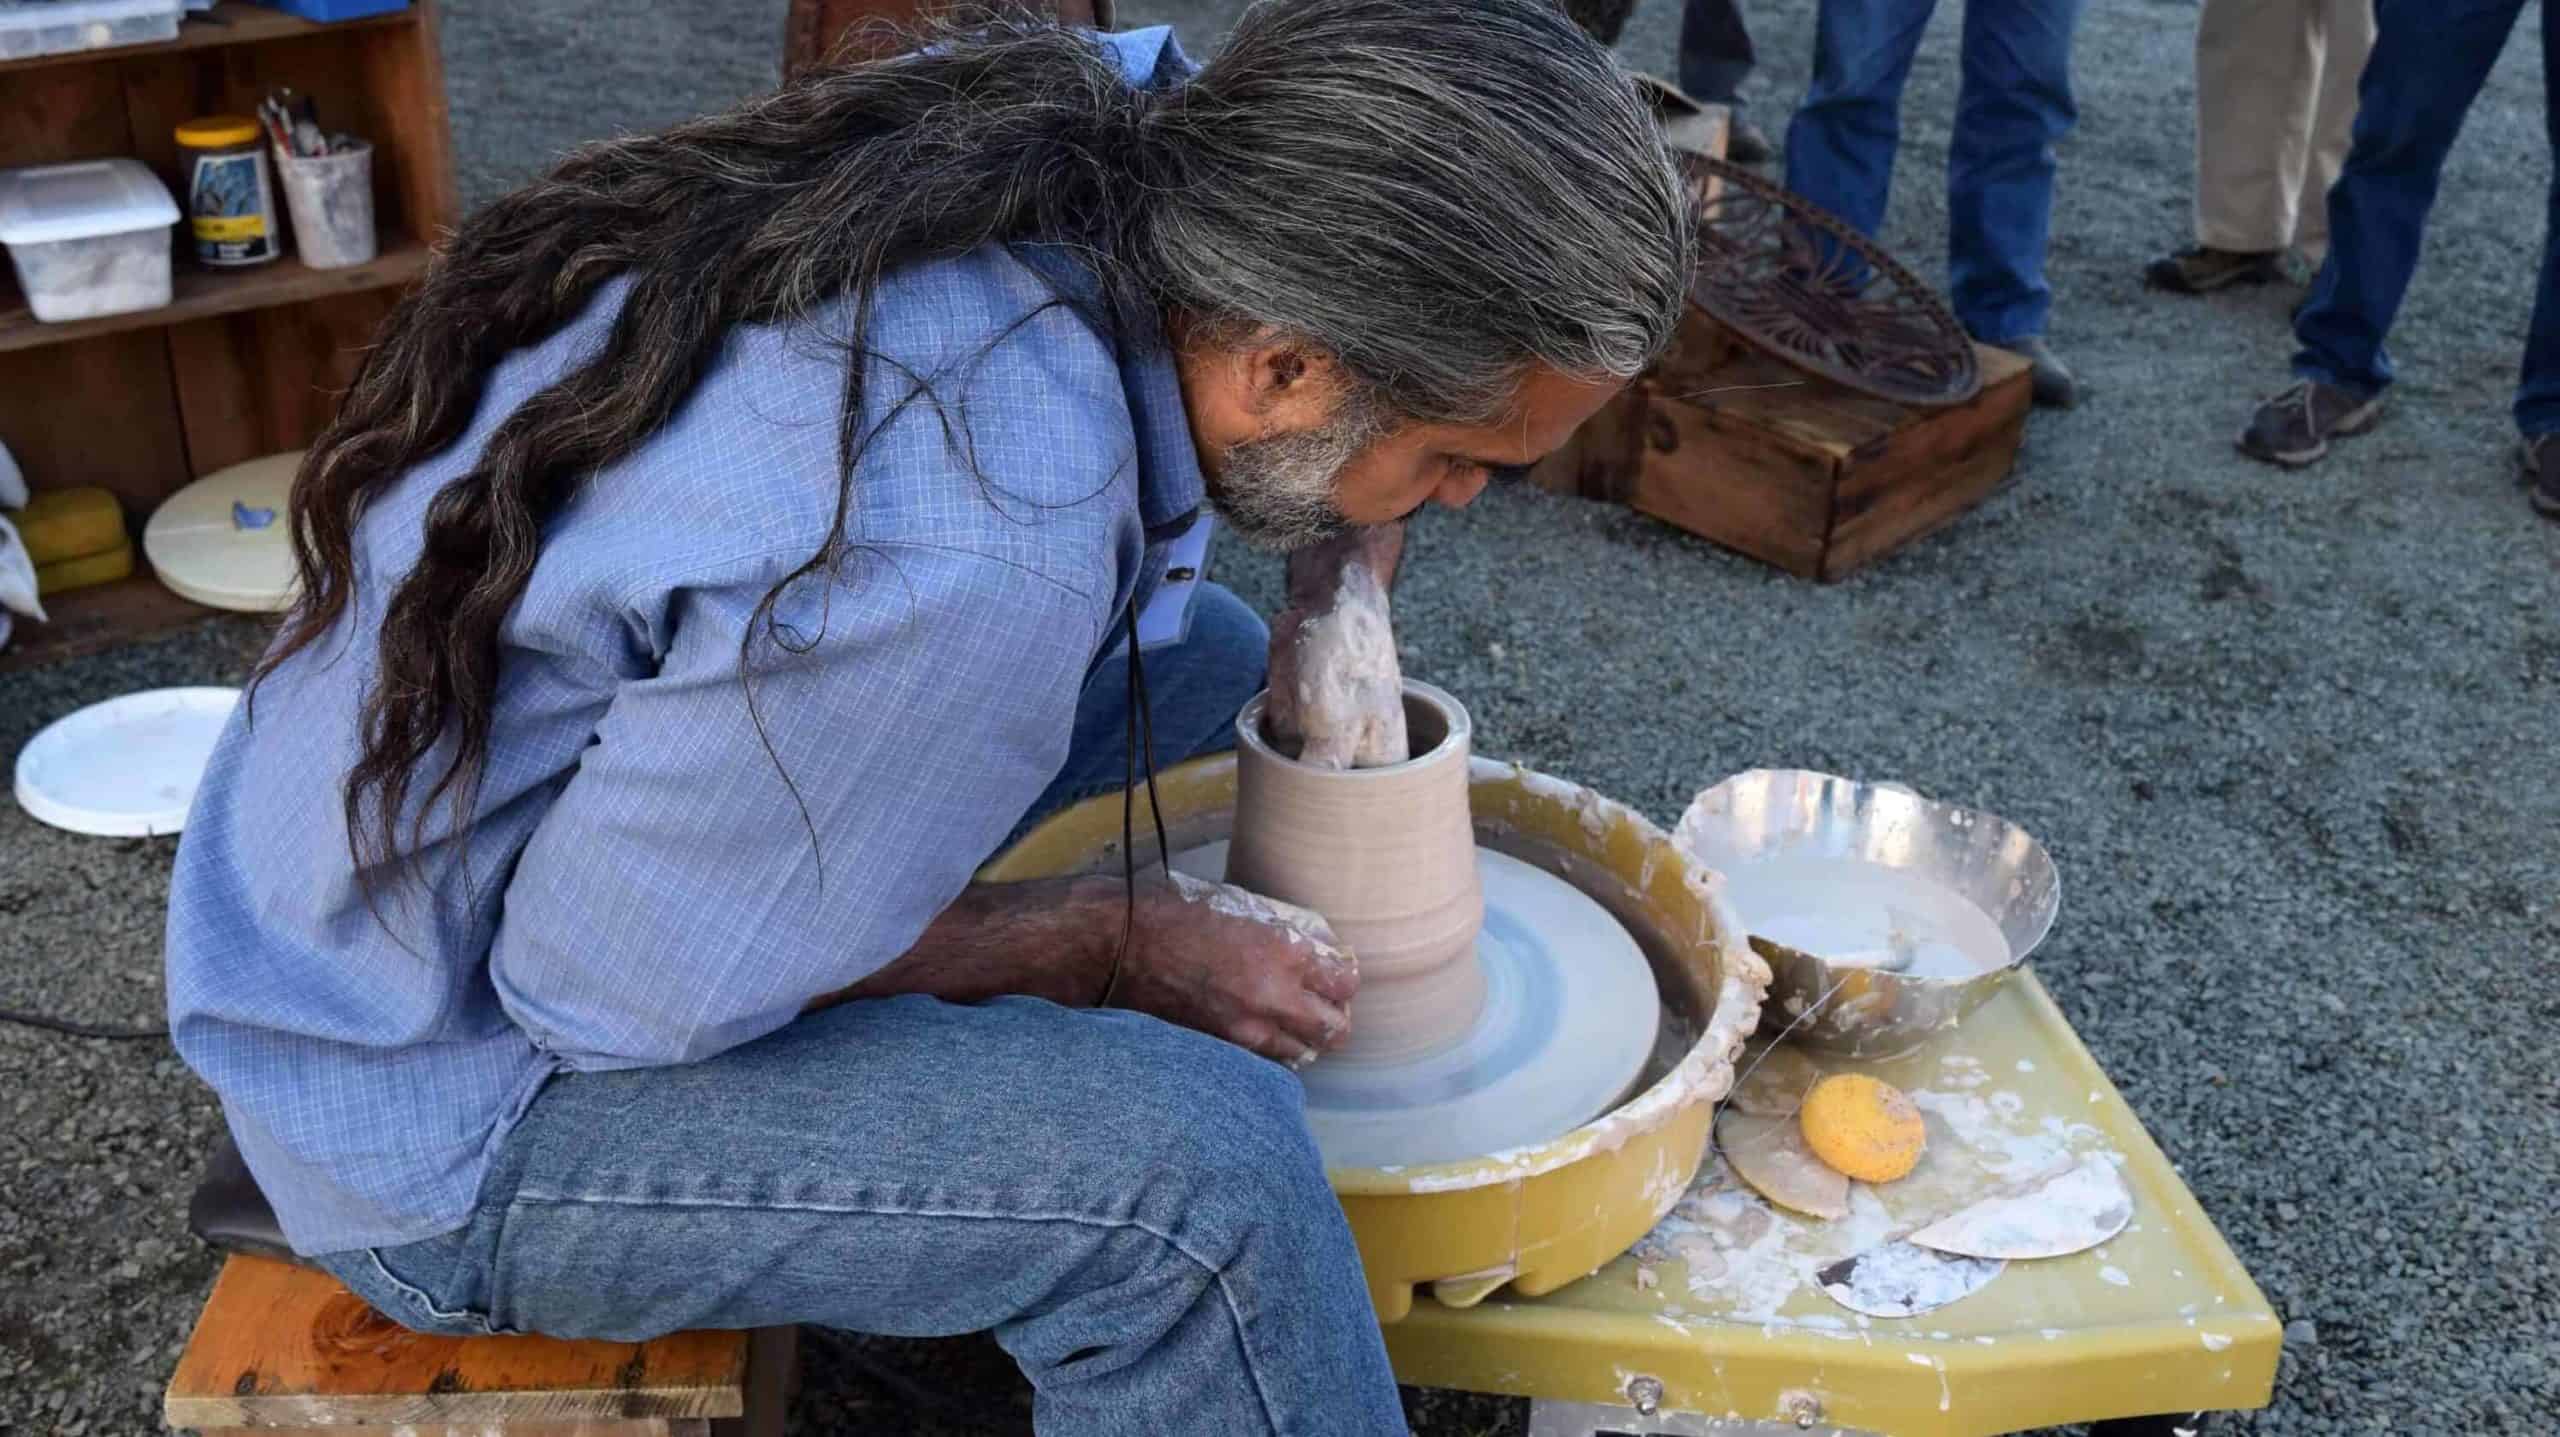 Vicente Garcia demonstrates on the potter's wheel at Paradise City Arts Festival. A ceramist and college professor, Garcia is also a sculptor of large-scale metal structures. He will share the secrets of his studio every day at the Festival. Photo courtesy of Paradise City Arts Festival in Northampton